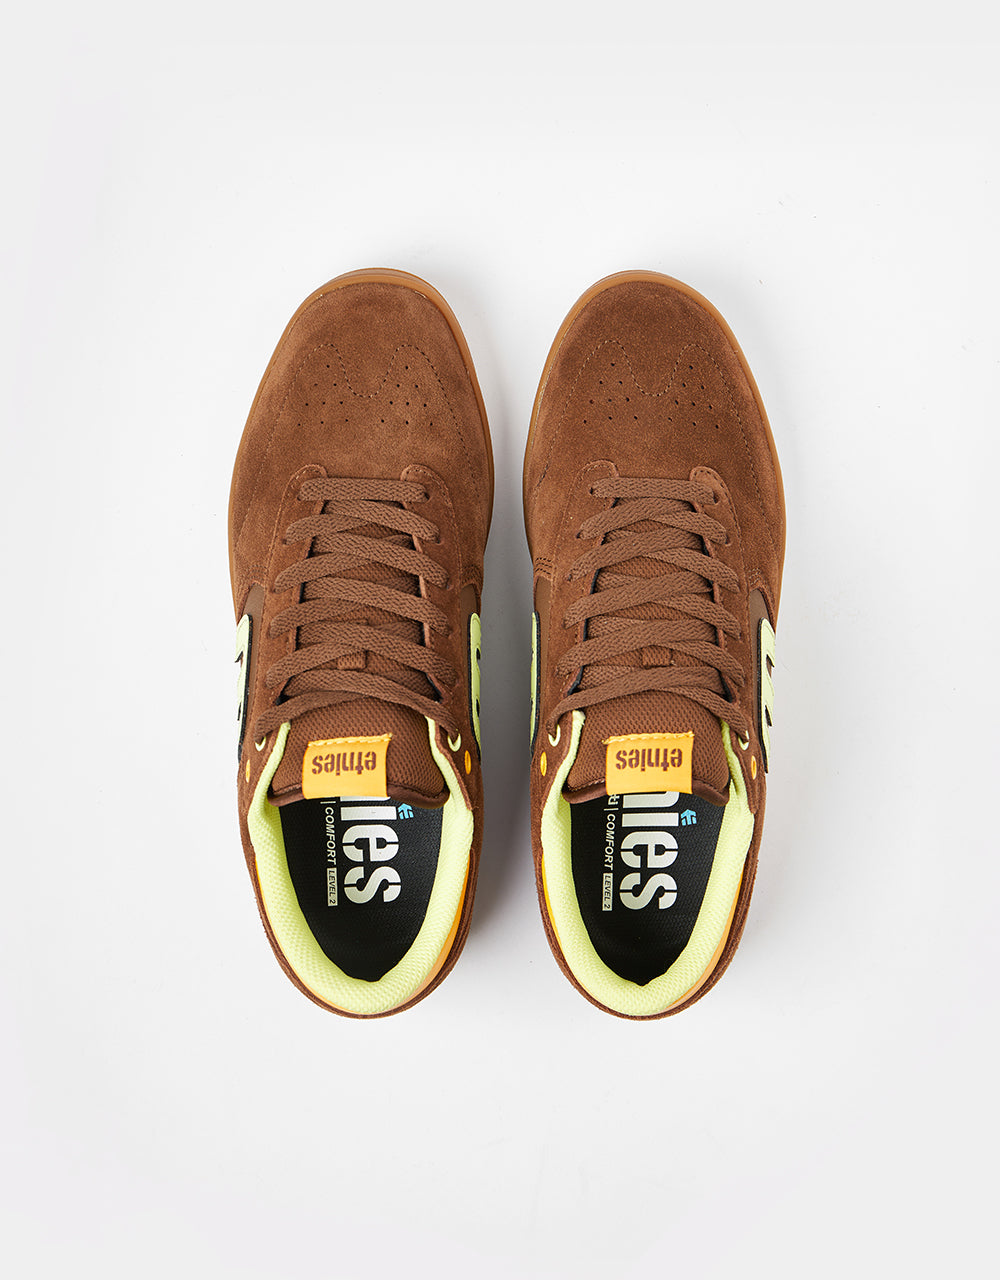 Etnies Windrow Skate Shoes - Brown/Gum